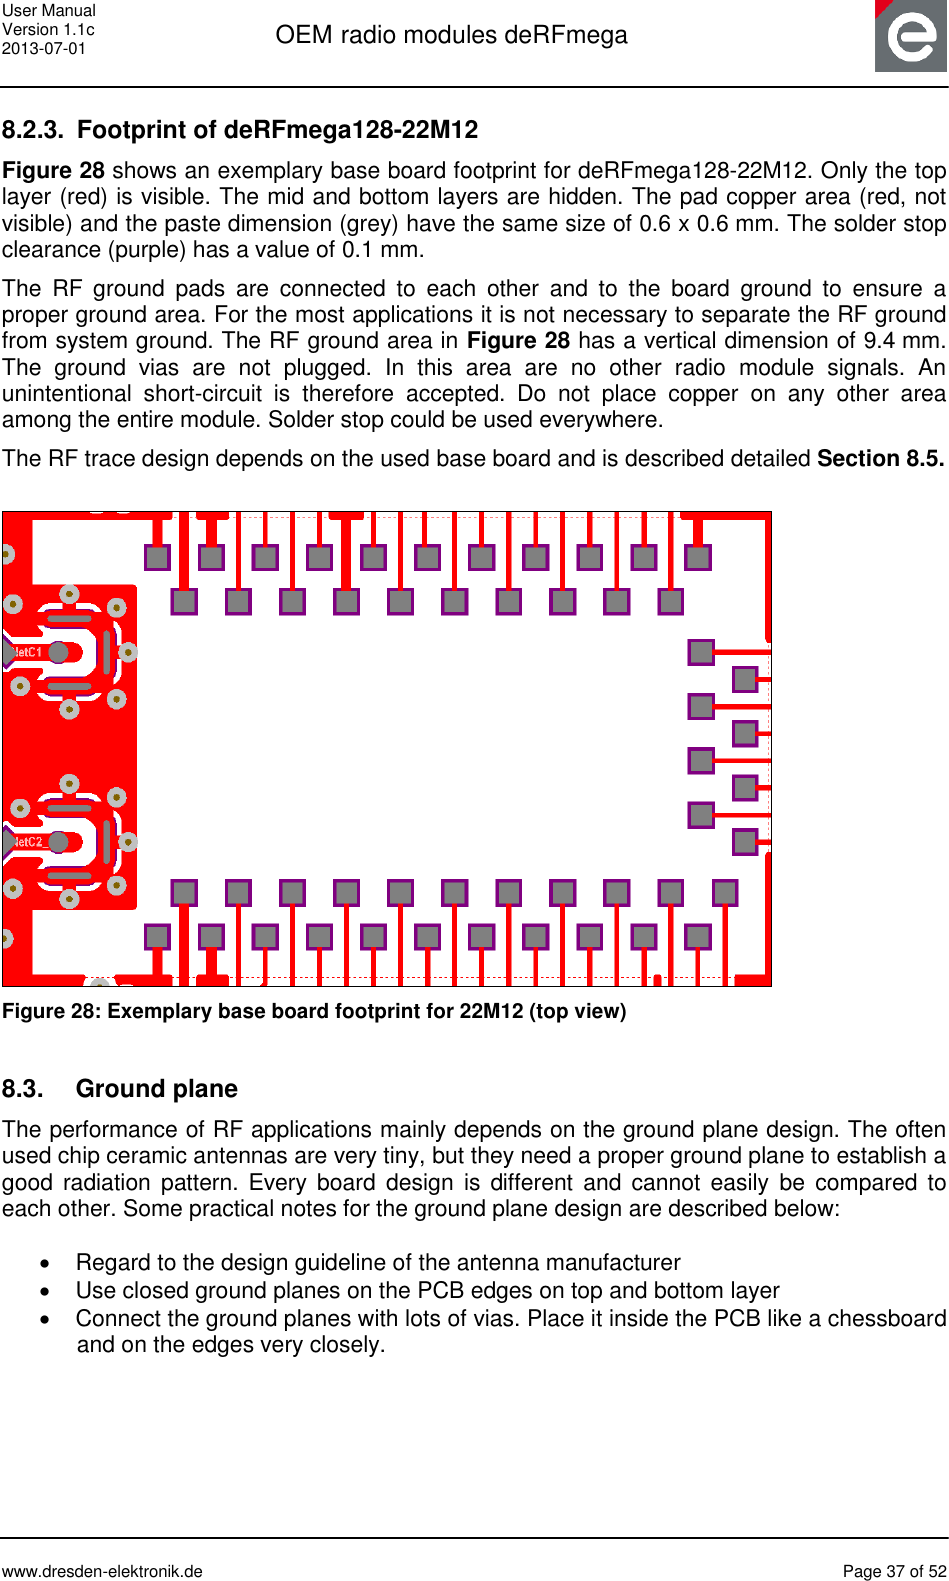 User Manual Version 1.1c 2013-07-01  OEM radio modules deRFmega      www.dresden-elektronik.de  Page 37 of 52  8.2.3.  Footprint of deRFmega128-22M12 Figure 28 shows an exemplary base board footprint for deRFmega128-22M12. Only the top layer (red) is visible. The mid and bottom layers are hidden. The pad copper area (red, not visible) and the paste dimension (grey) have the same size of 0.6 x 0.6 mm. The solder stop clearance (purple) has a value of 0.1 mm. The  RF  ground  pads  are  connected  to  each  other  and  to  the  board  ground  to  ensure  a proper ground area. For the most applications it is not necessary to separate the RF ground from system ground. The RF ground area in Figure 28 has a vertical dimension of 9.4 mm. The  ground  vias  are  not  plugged.  In  this  area  are  no  other  radio  module  signals.  An unintentional  short-circuit  is  therefore  accepted.  Do  not  place  copper  on  any  other  area among the entire module. Solder stop could be used everywhere. The RF trace design depends on the used base board and is described detailed Section 8.5.   Figure 28: Exemplary base board footprint for 22M12 (top view)  8.3.  Ground plane The performance of RF applications mainly depends on the ground plane design. The often used chip ceramic antennas are very tiny, but they need a proper ground plane to establish a good  radiation  pattern. Every  board  design  is  different  and  cannot  easily  be  compared  to each other. Some practical notes for the ground plane design are described below:    Regard to the design guideline of the antenna manufacturer   Use closed ground planes on the PCB edges on top and bottom layer   Connect the ground planes with lots of vias. Place it inside the PCB like a chessboard and on the edges very closely.  